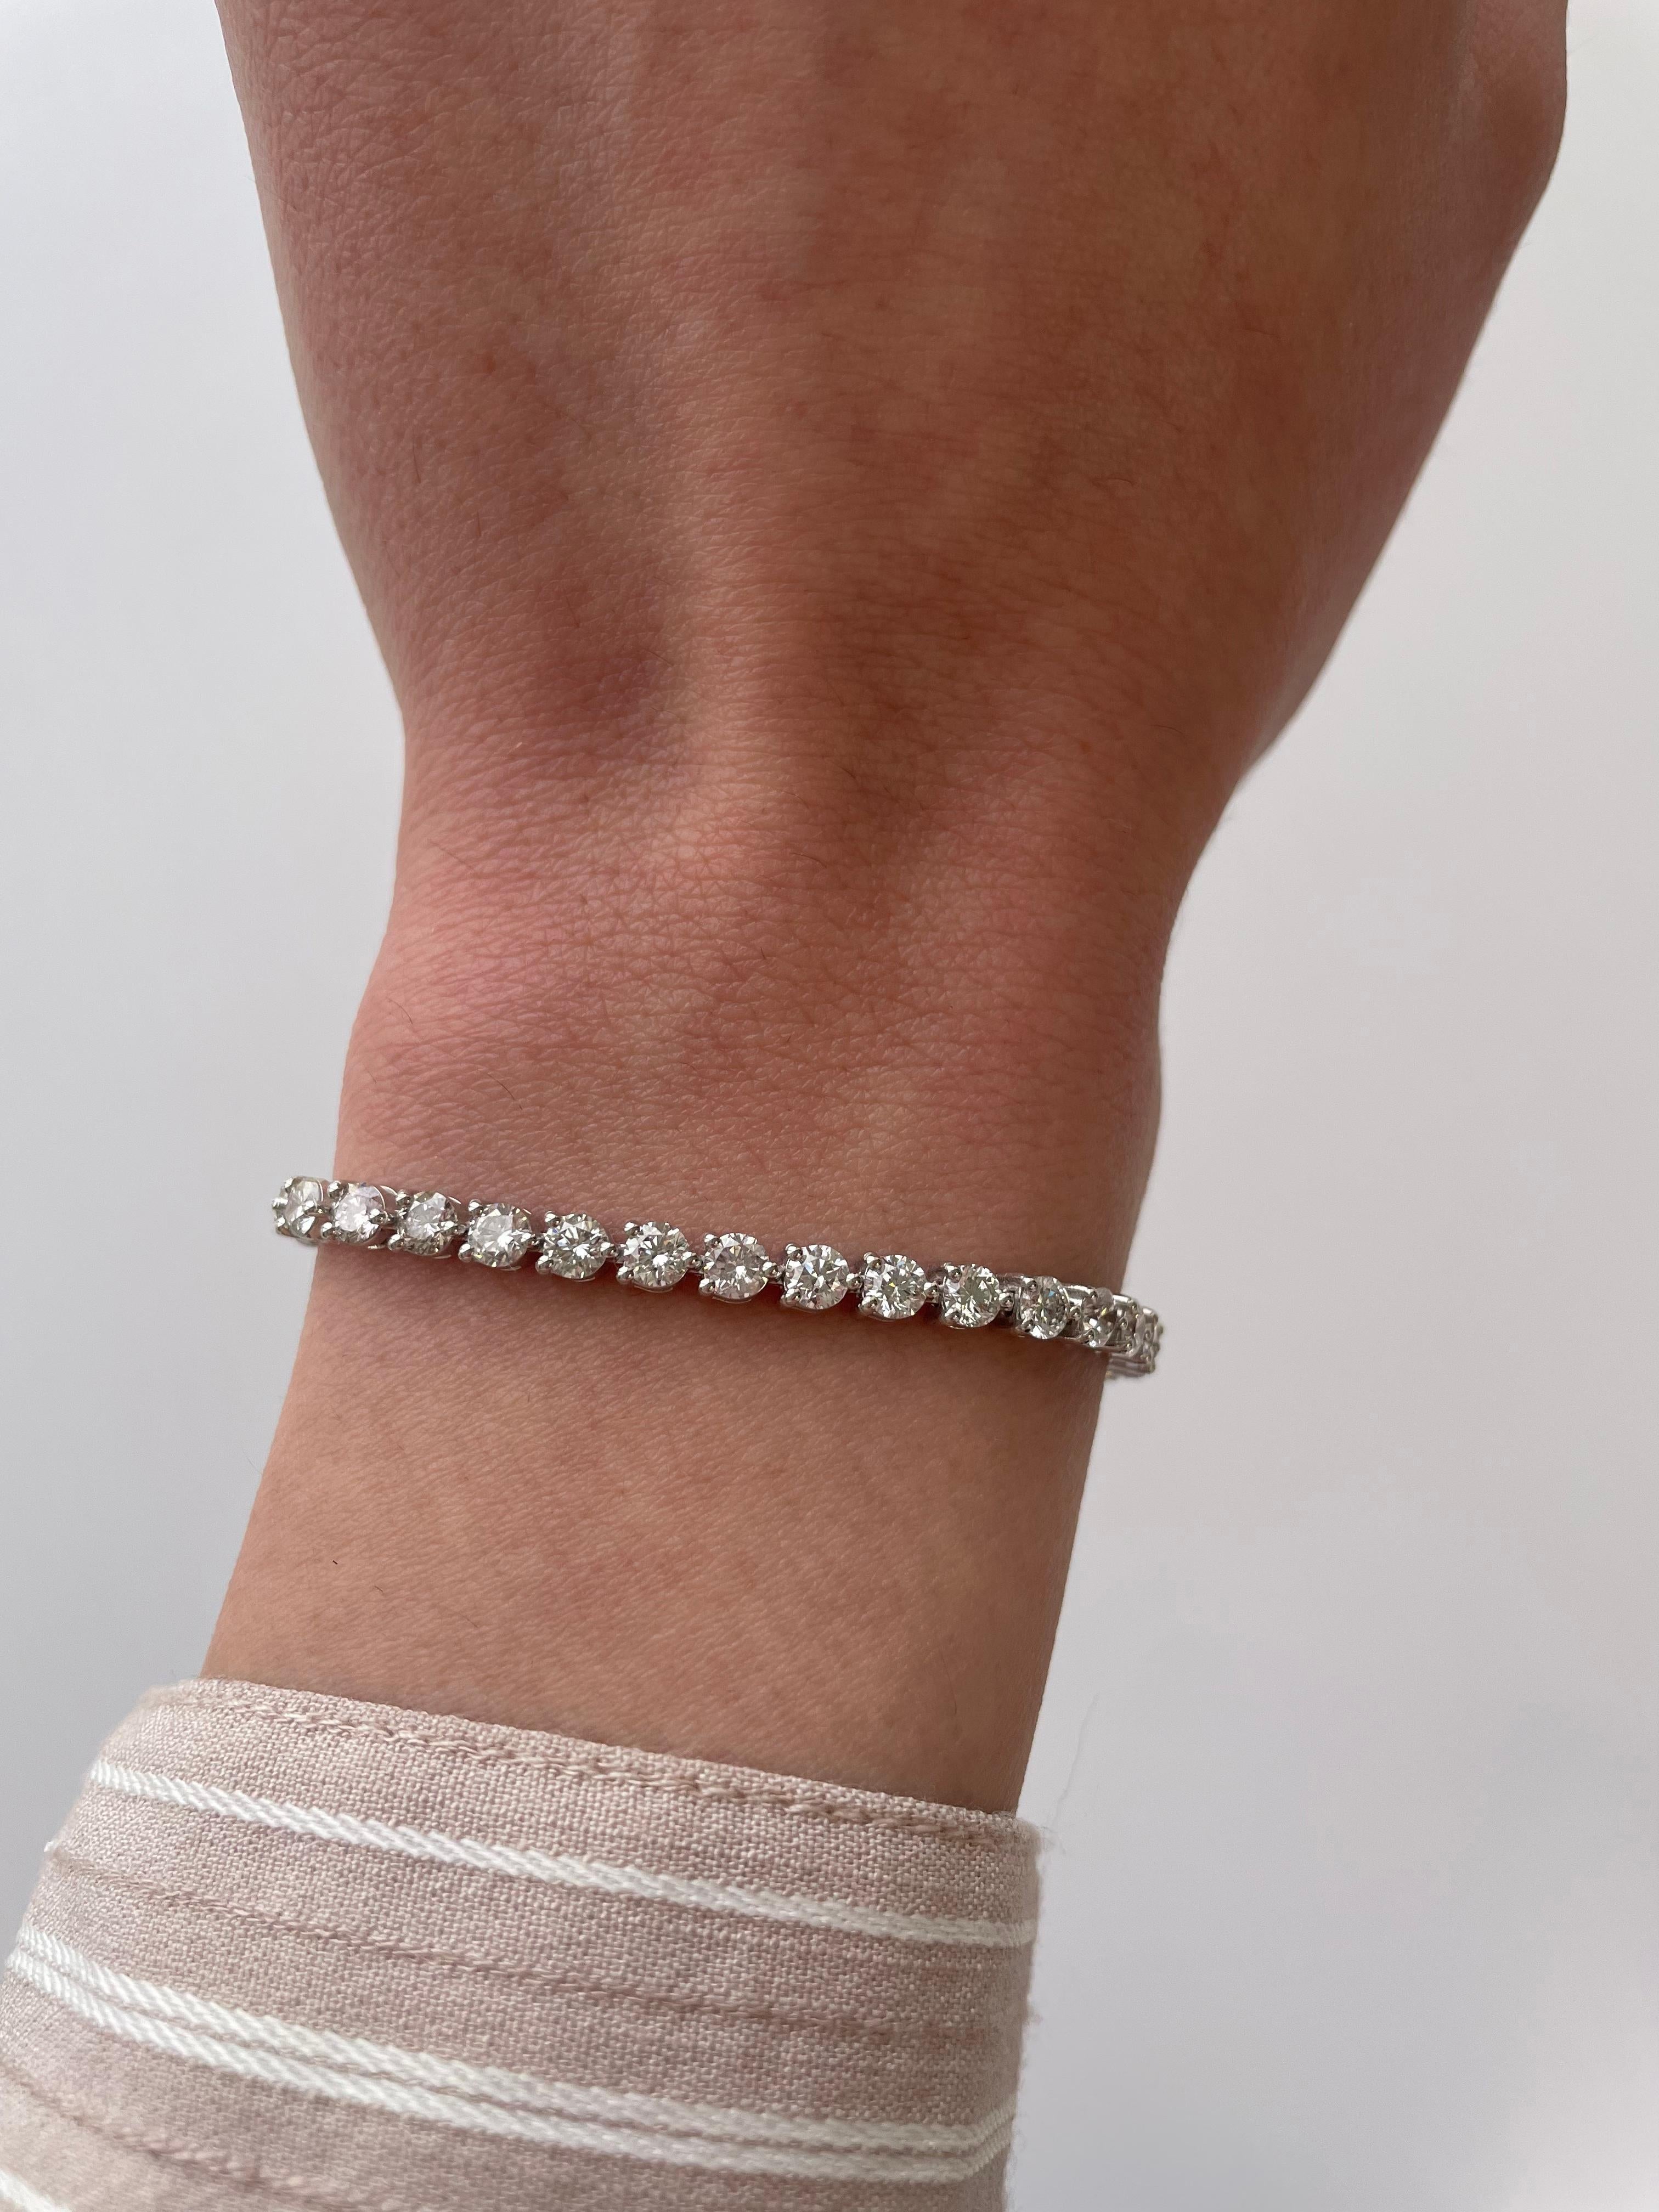 Beautiful and classic diamond tennis bracelet, by Alexander Beverly Hills.
41 round brilliant diamonds, 6.91 carats. Approximately H/I color and VS clarity. 18k white gold, three prong set, 7in.
Accommodated with an up-to-date appraisal by a GIA